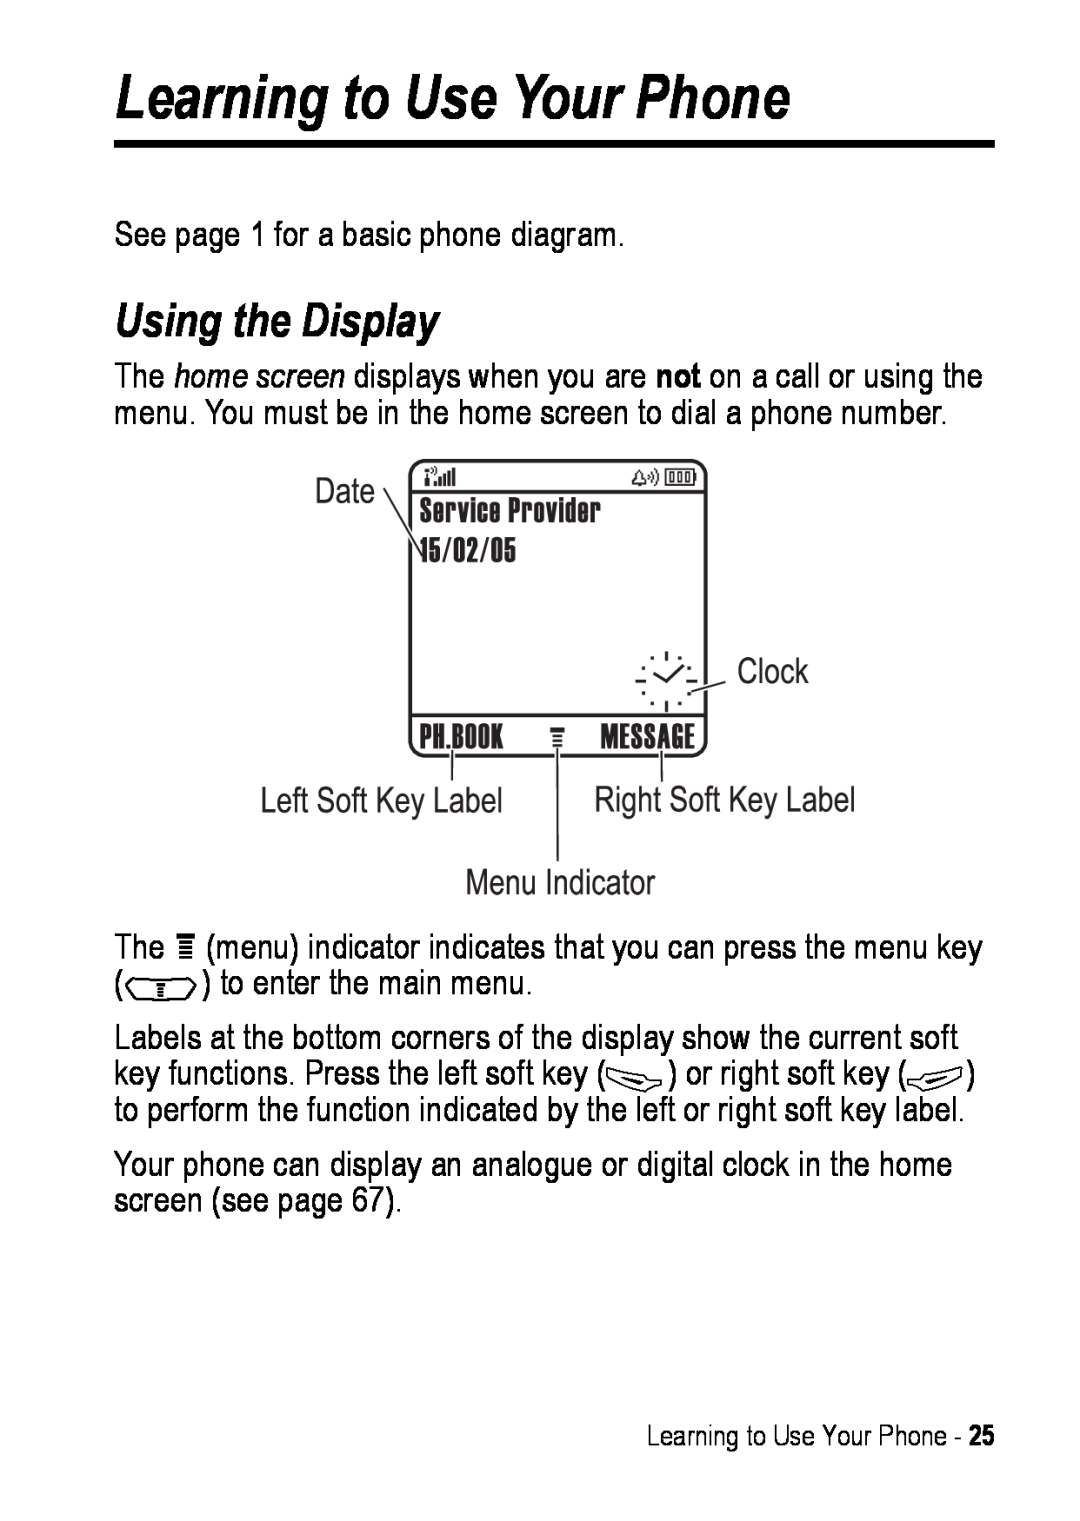 Motorola C390 manual Learning to Use Your Phone, Using the Display 